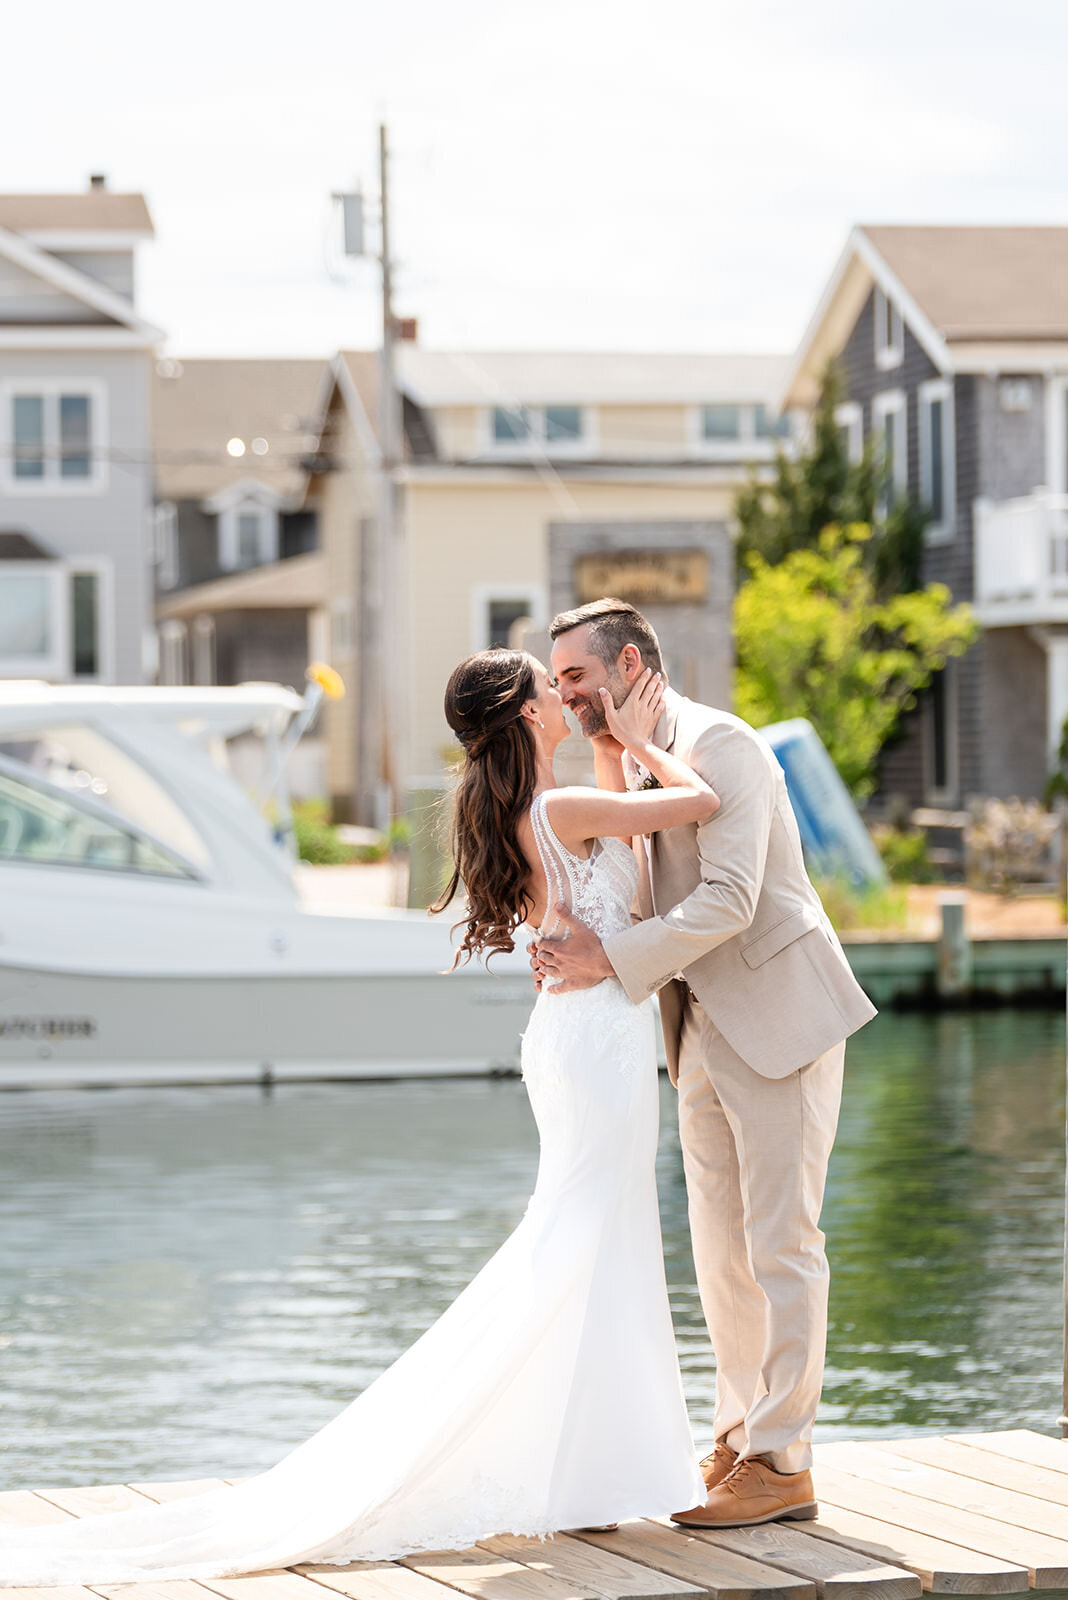 A bride and groom tenderly kissing on a sunny dock, with waterfront homes and a boat in the background.